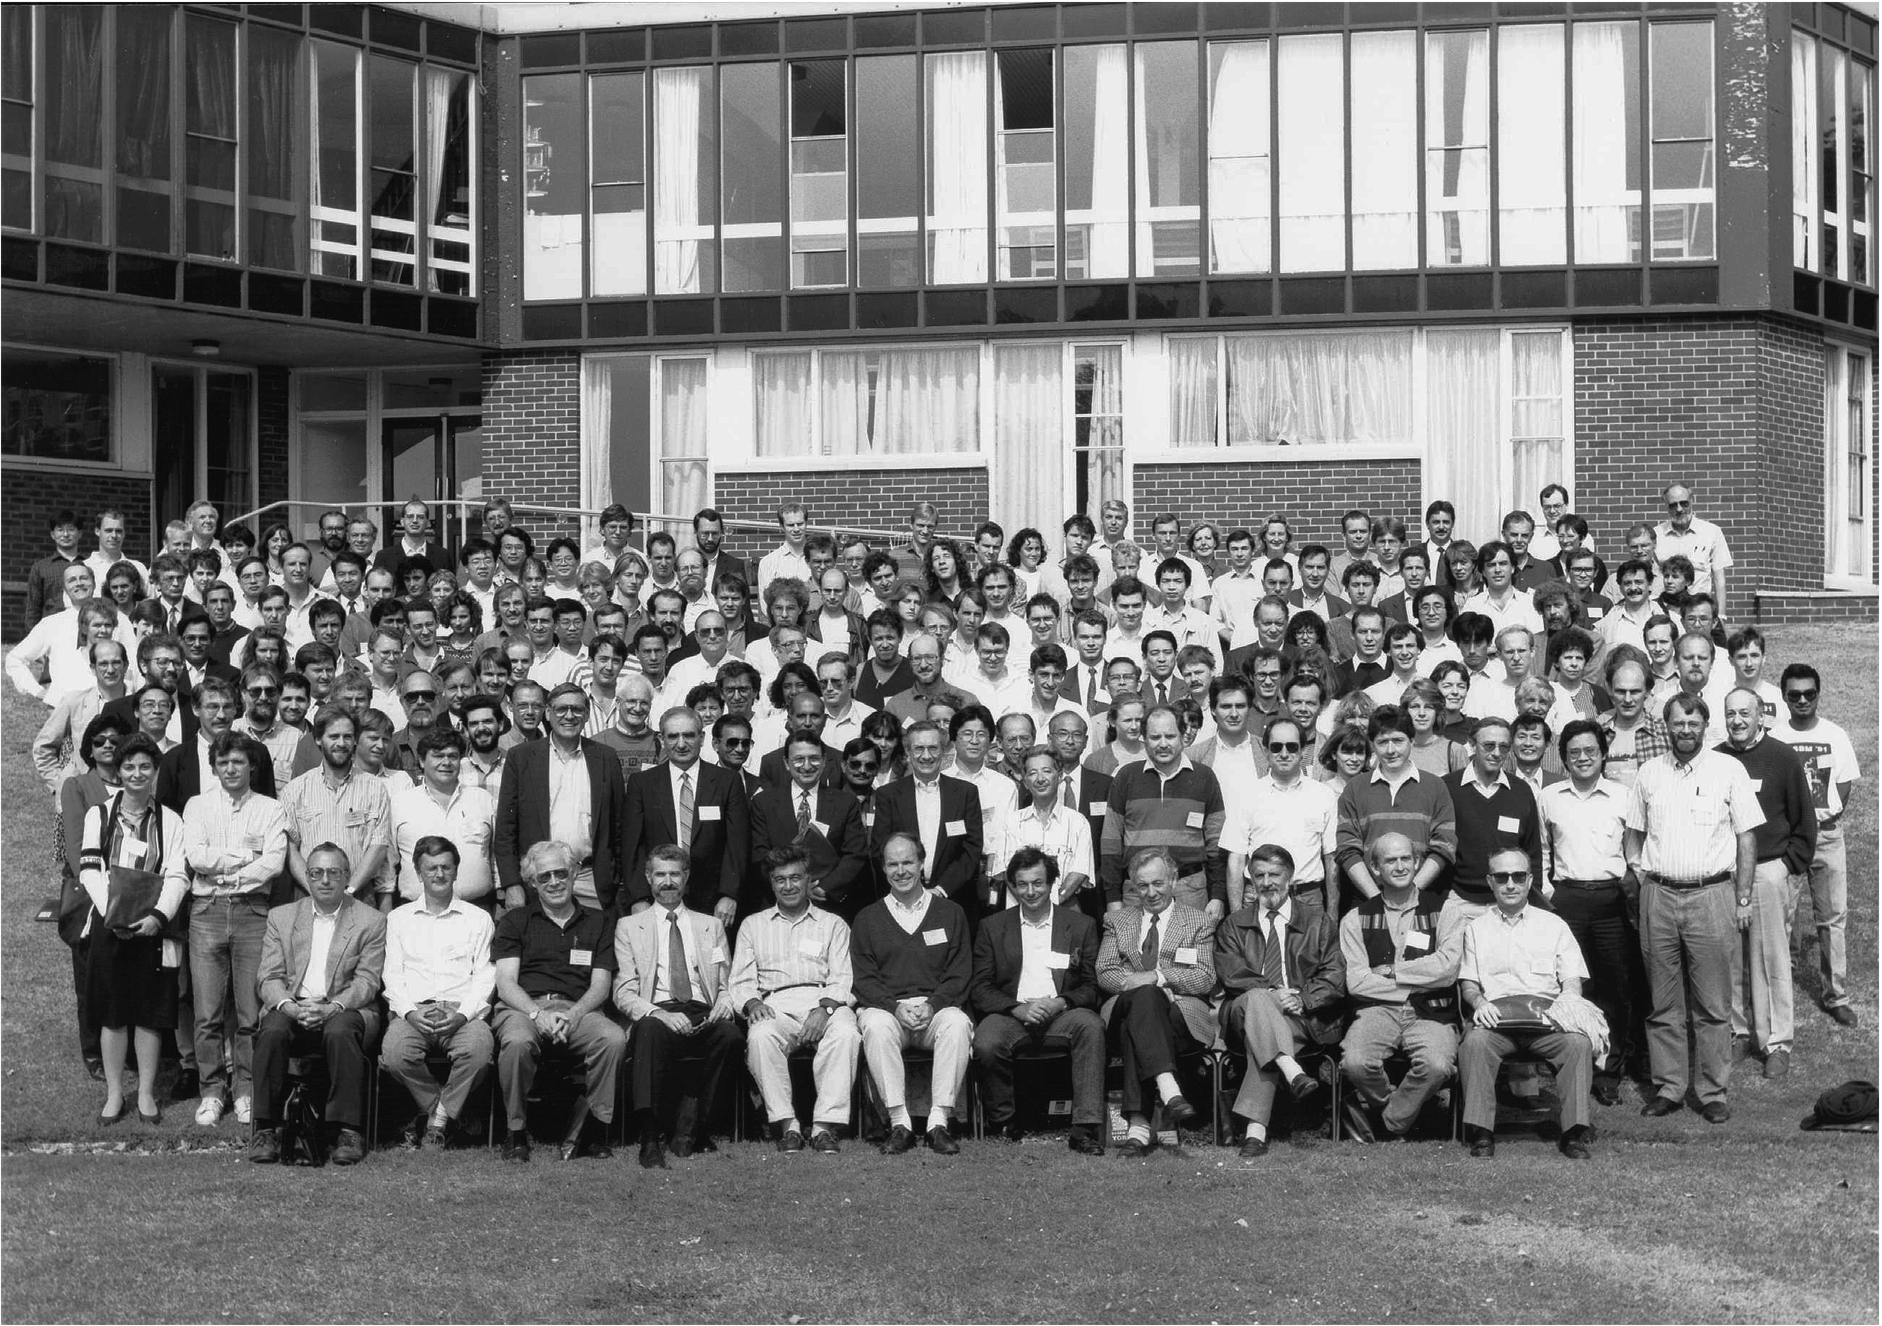 Group photograph from the 1991 ECSBM conference in York, UK (private photograph).